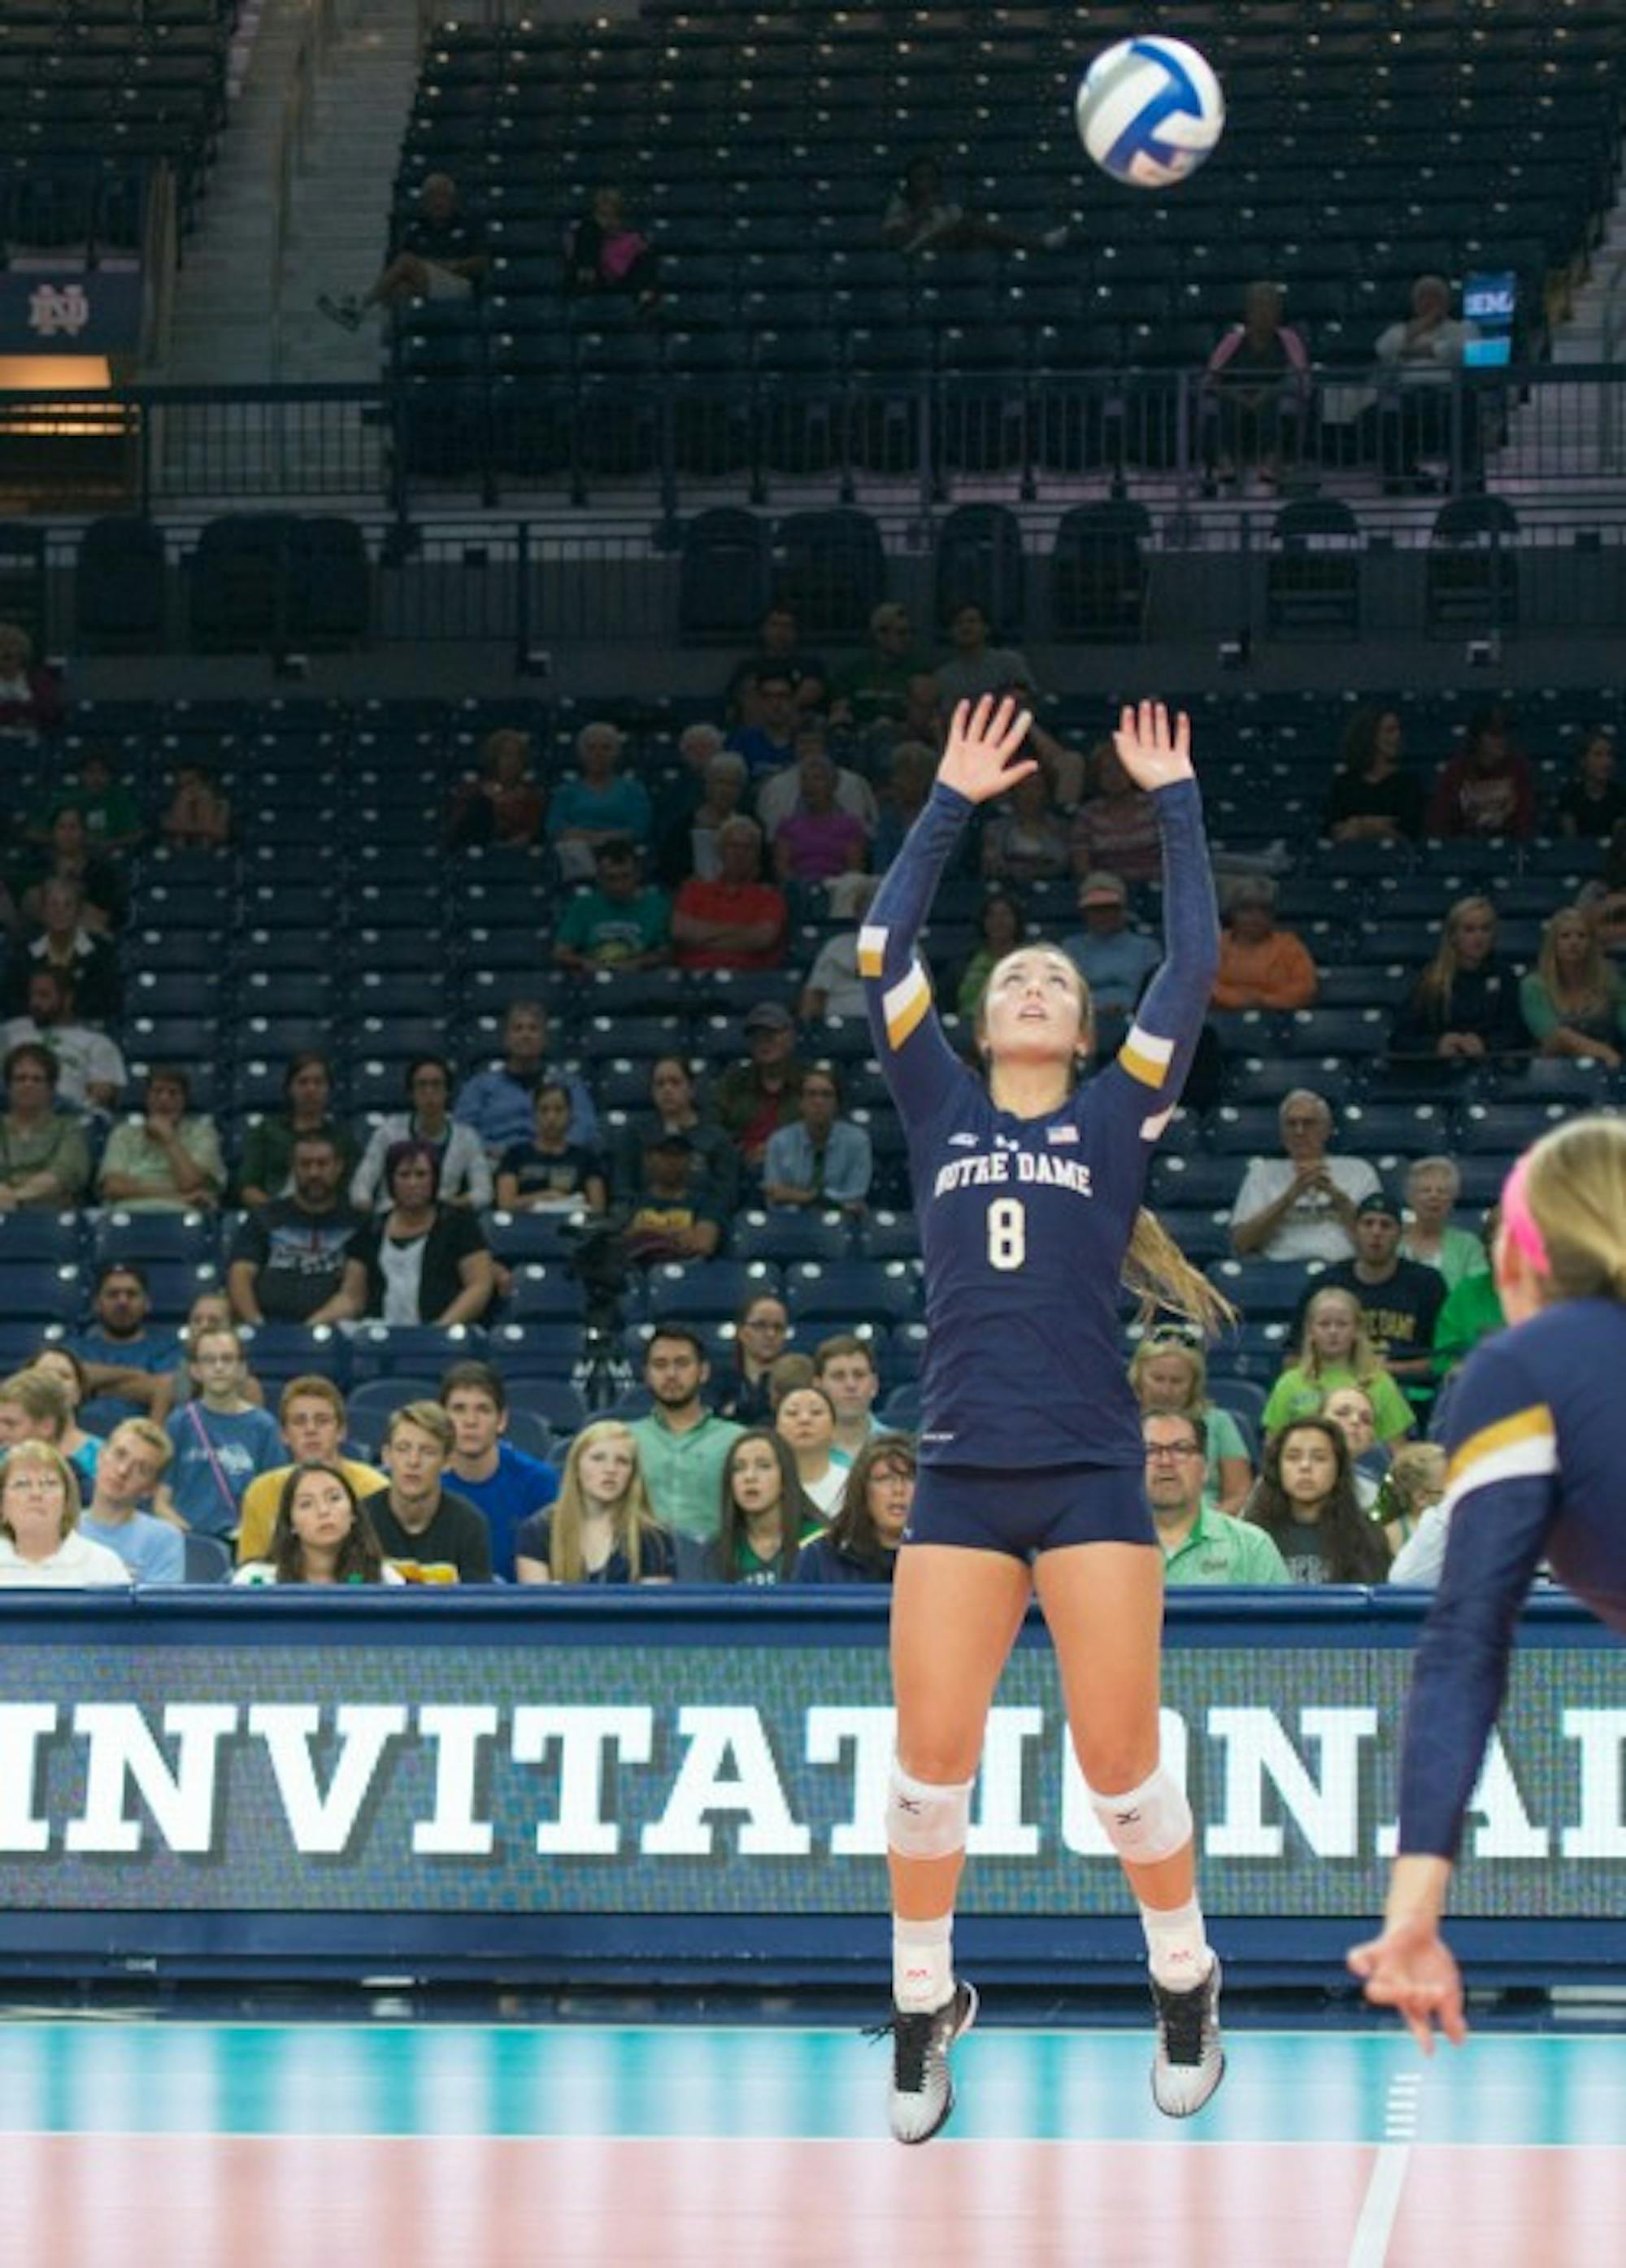 Irish junior setter Caroline Holt sets up a kill during Notre Dame’s 3-0 loss against Coastal Carolina on Sept. 2 at Purcell Pavilion. Holt registered at least 30 assists in each of Notre Dame’s wins this weekend.